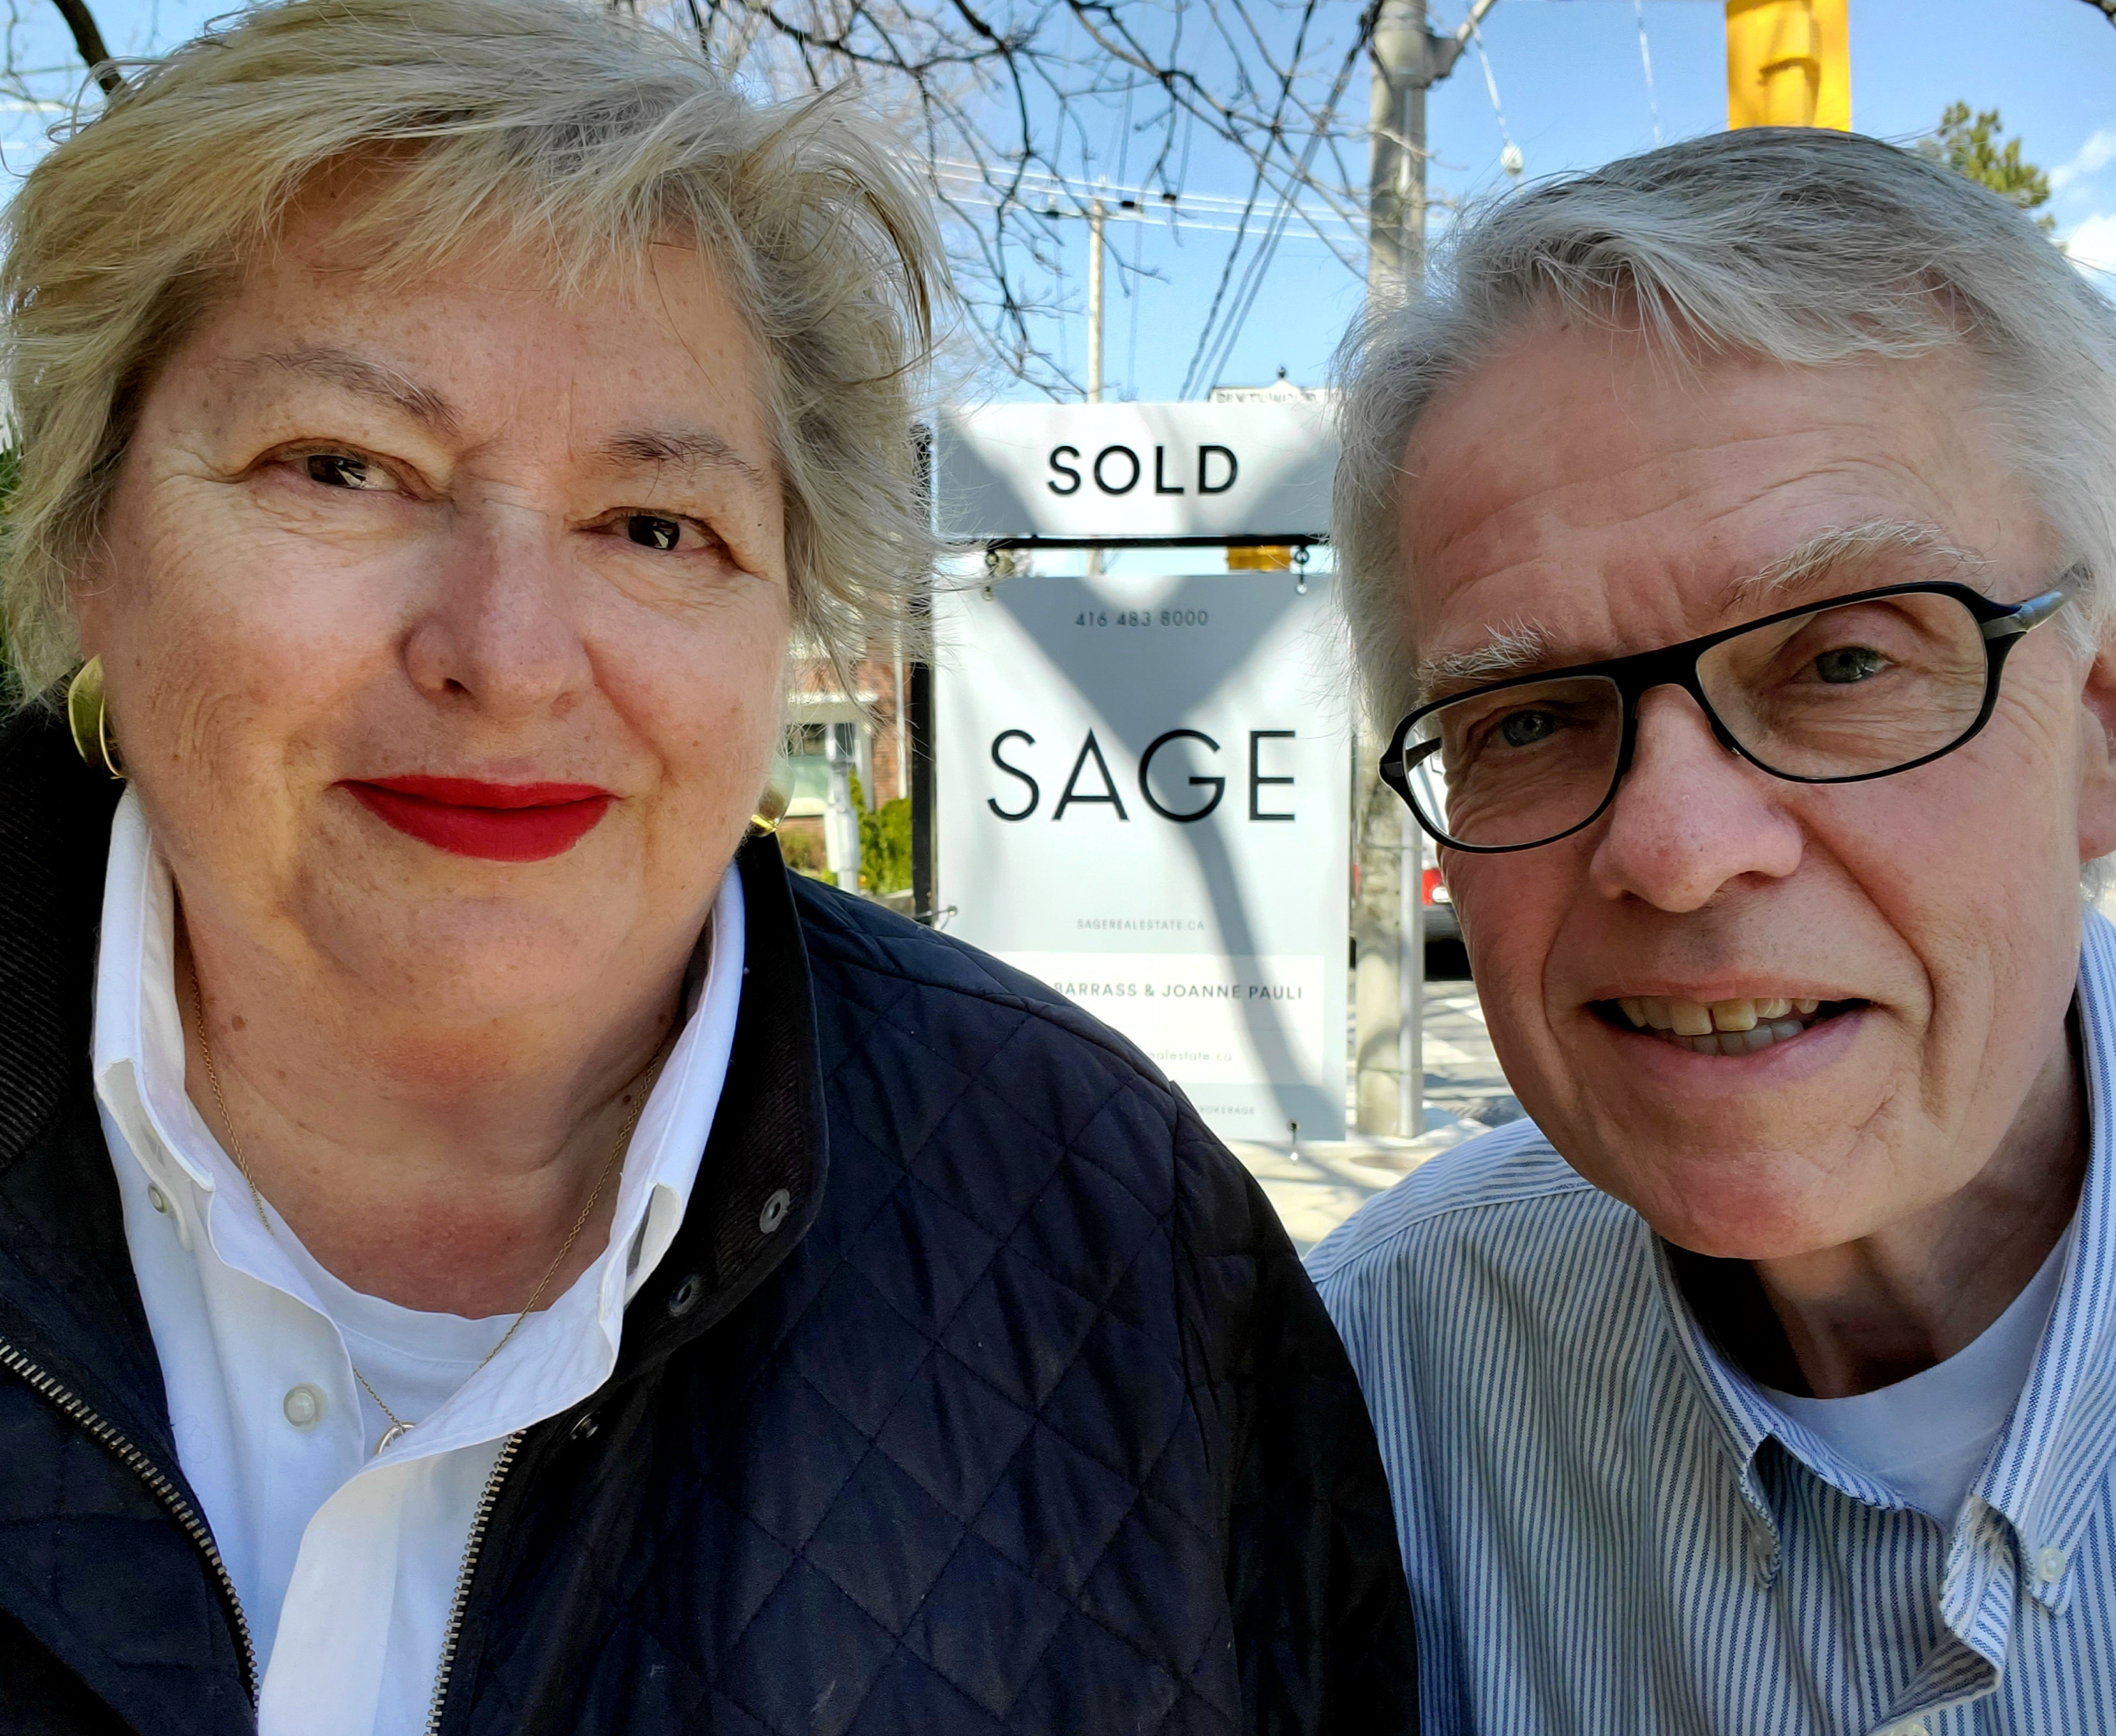 Joanne and James in front of Sage "sold" sign.